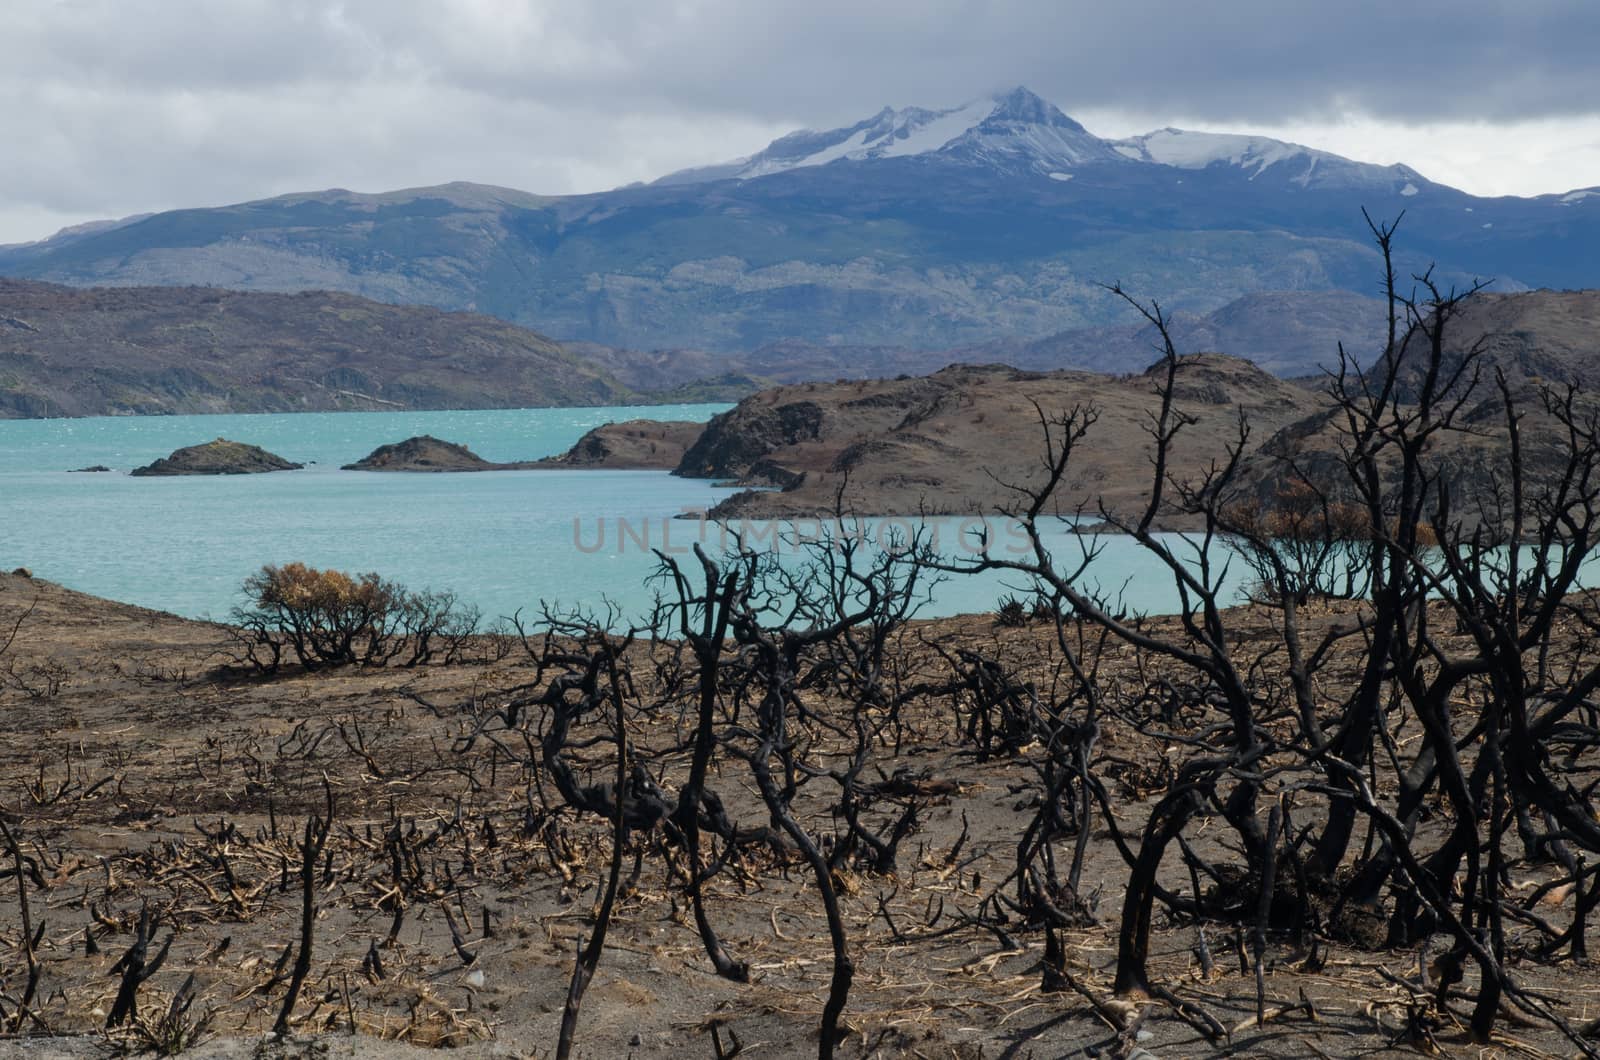 Pehoe lake and burned area in the Torres del Paine National Park by the great fire in 2011-2012. by VictorSuarez